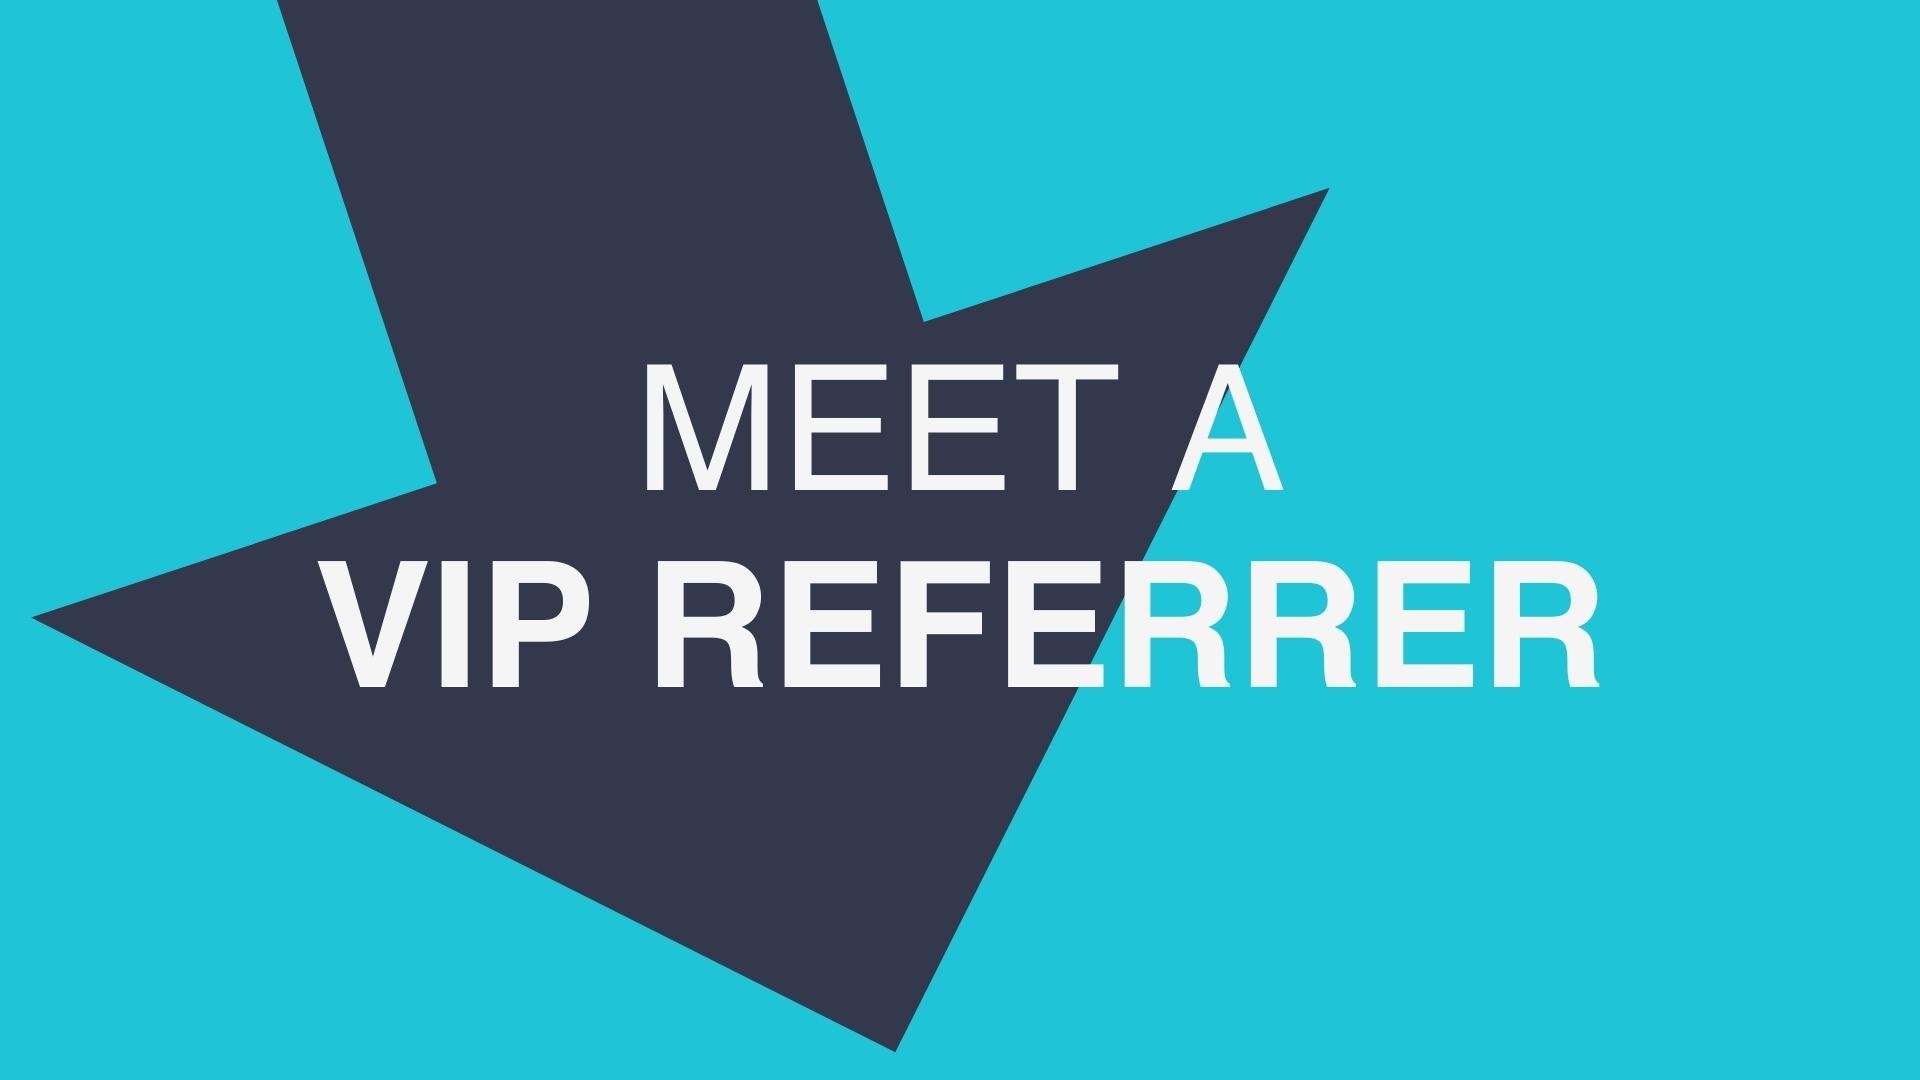 In conversation with: Refer a friend VIP